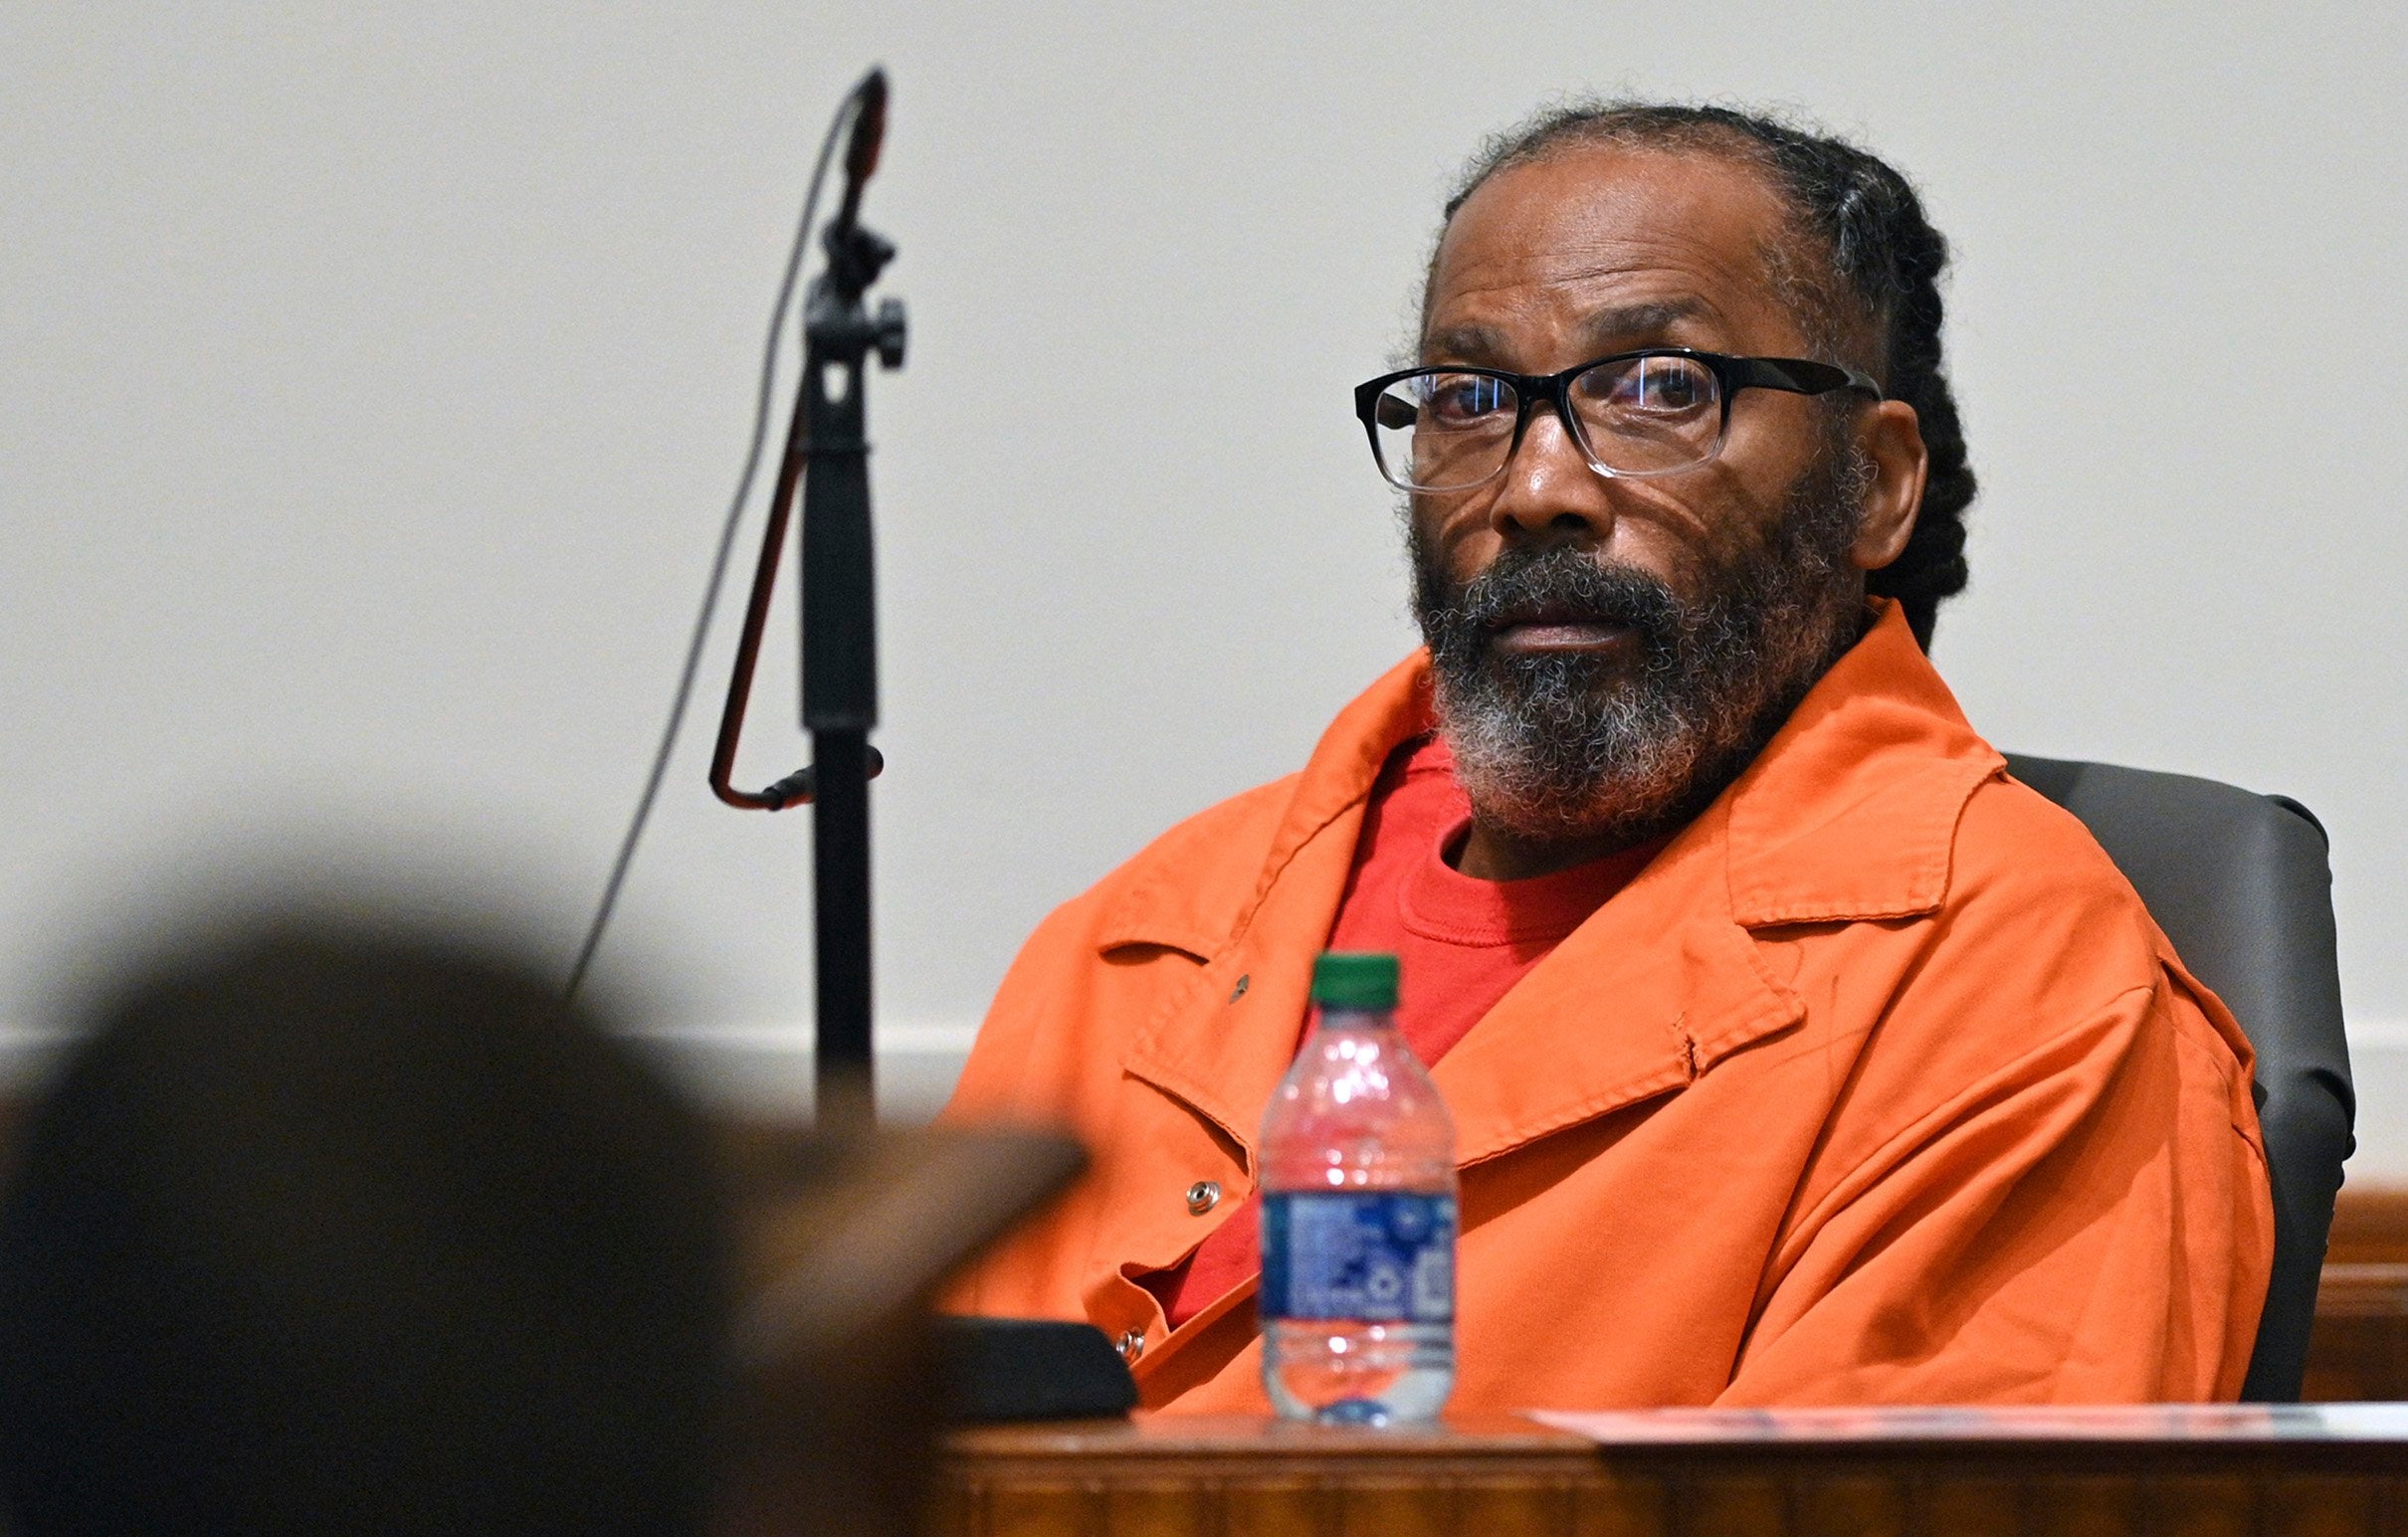 Kevin Strickland spent 43 years in prison before being exonerated